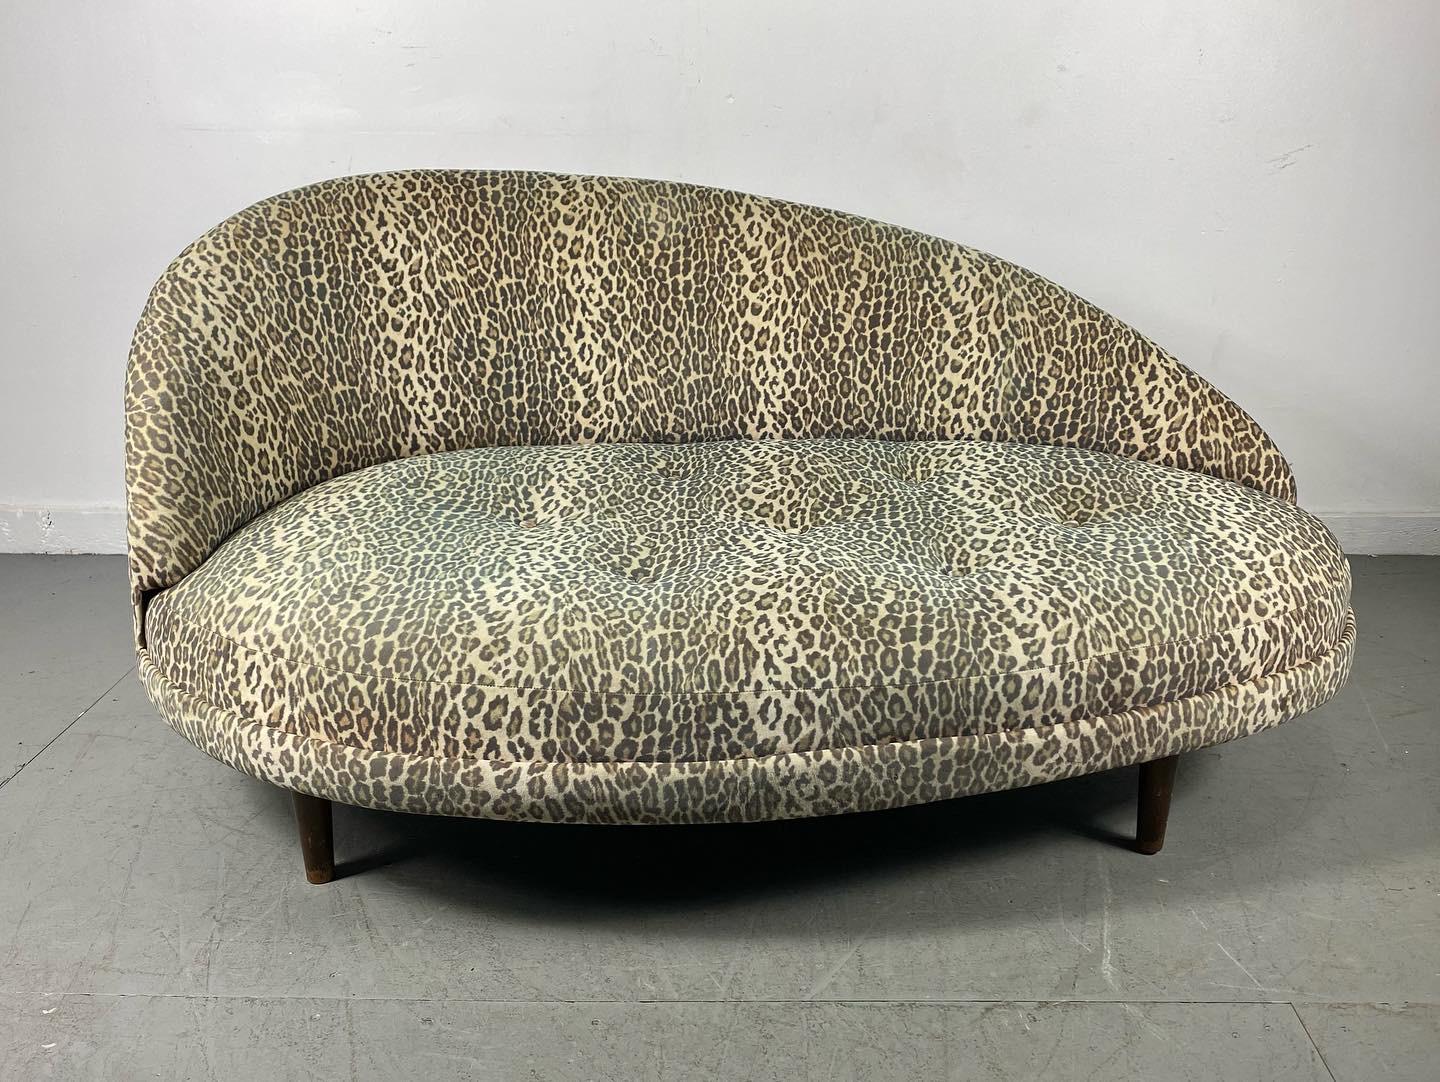 leopard chaise lounge